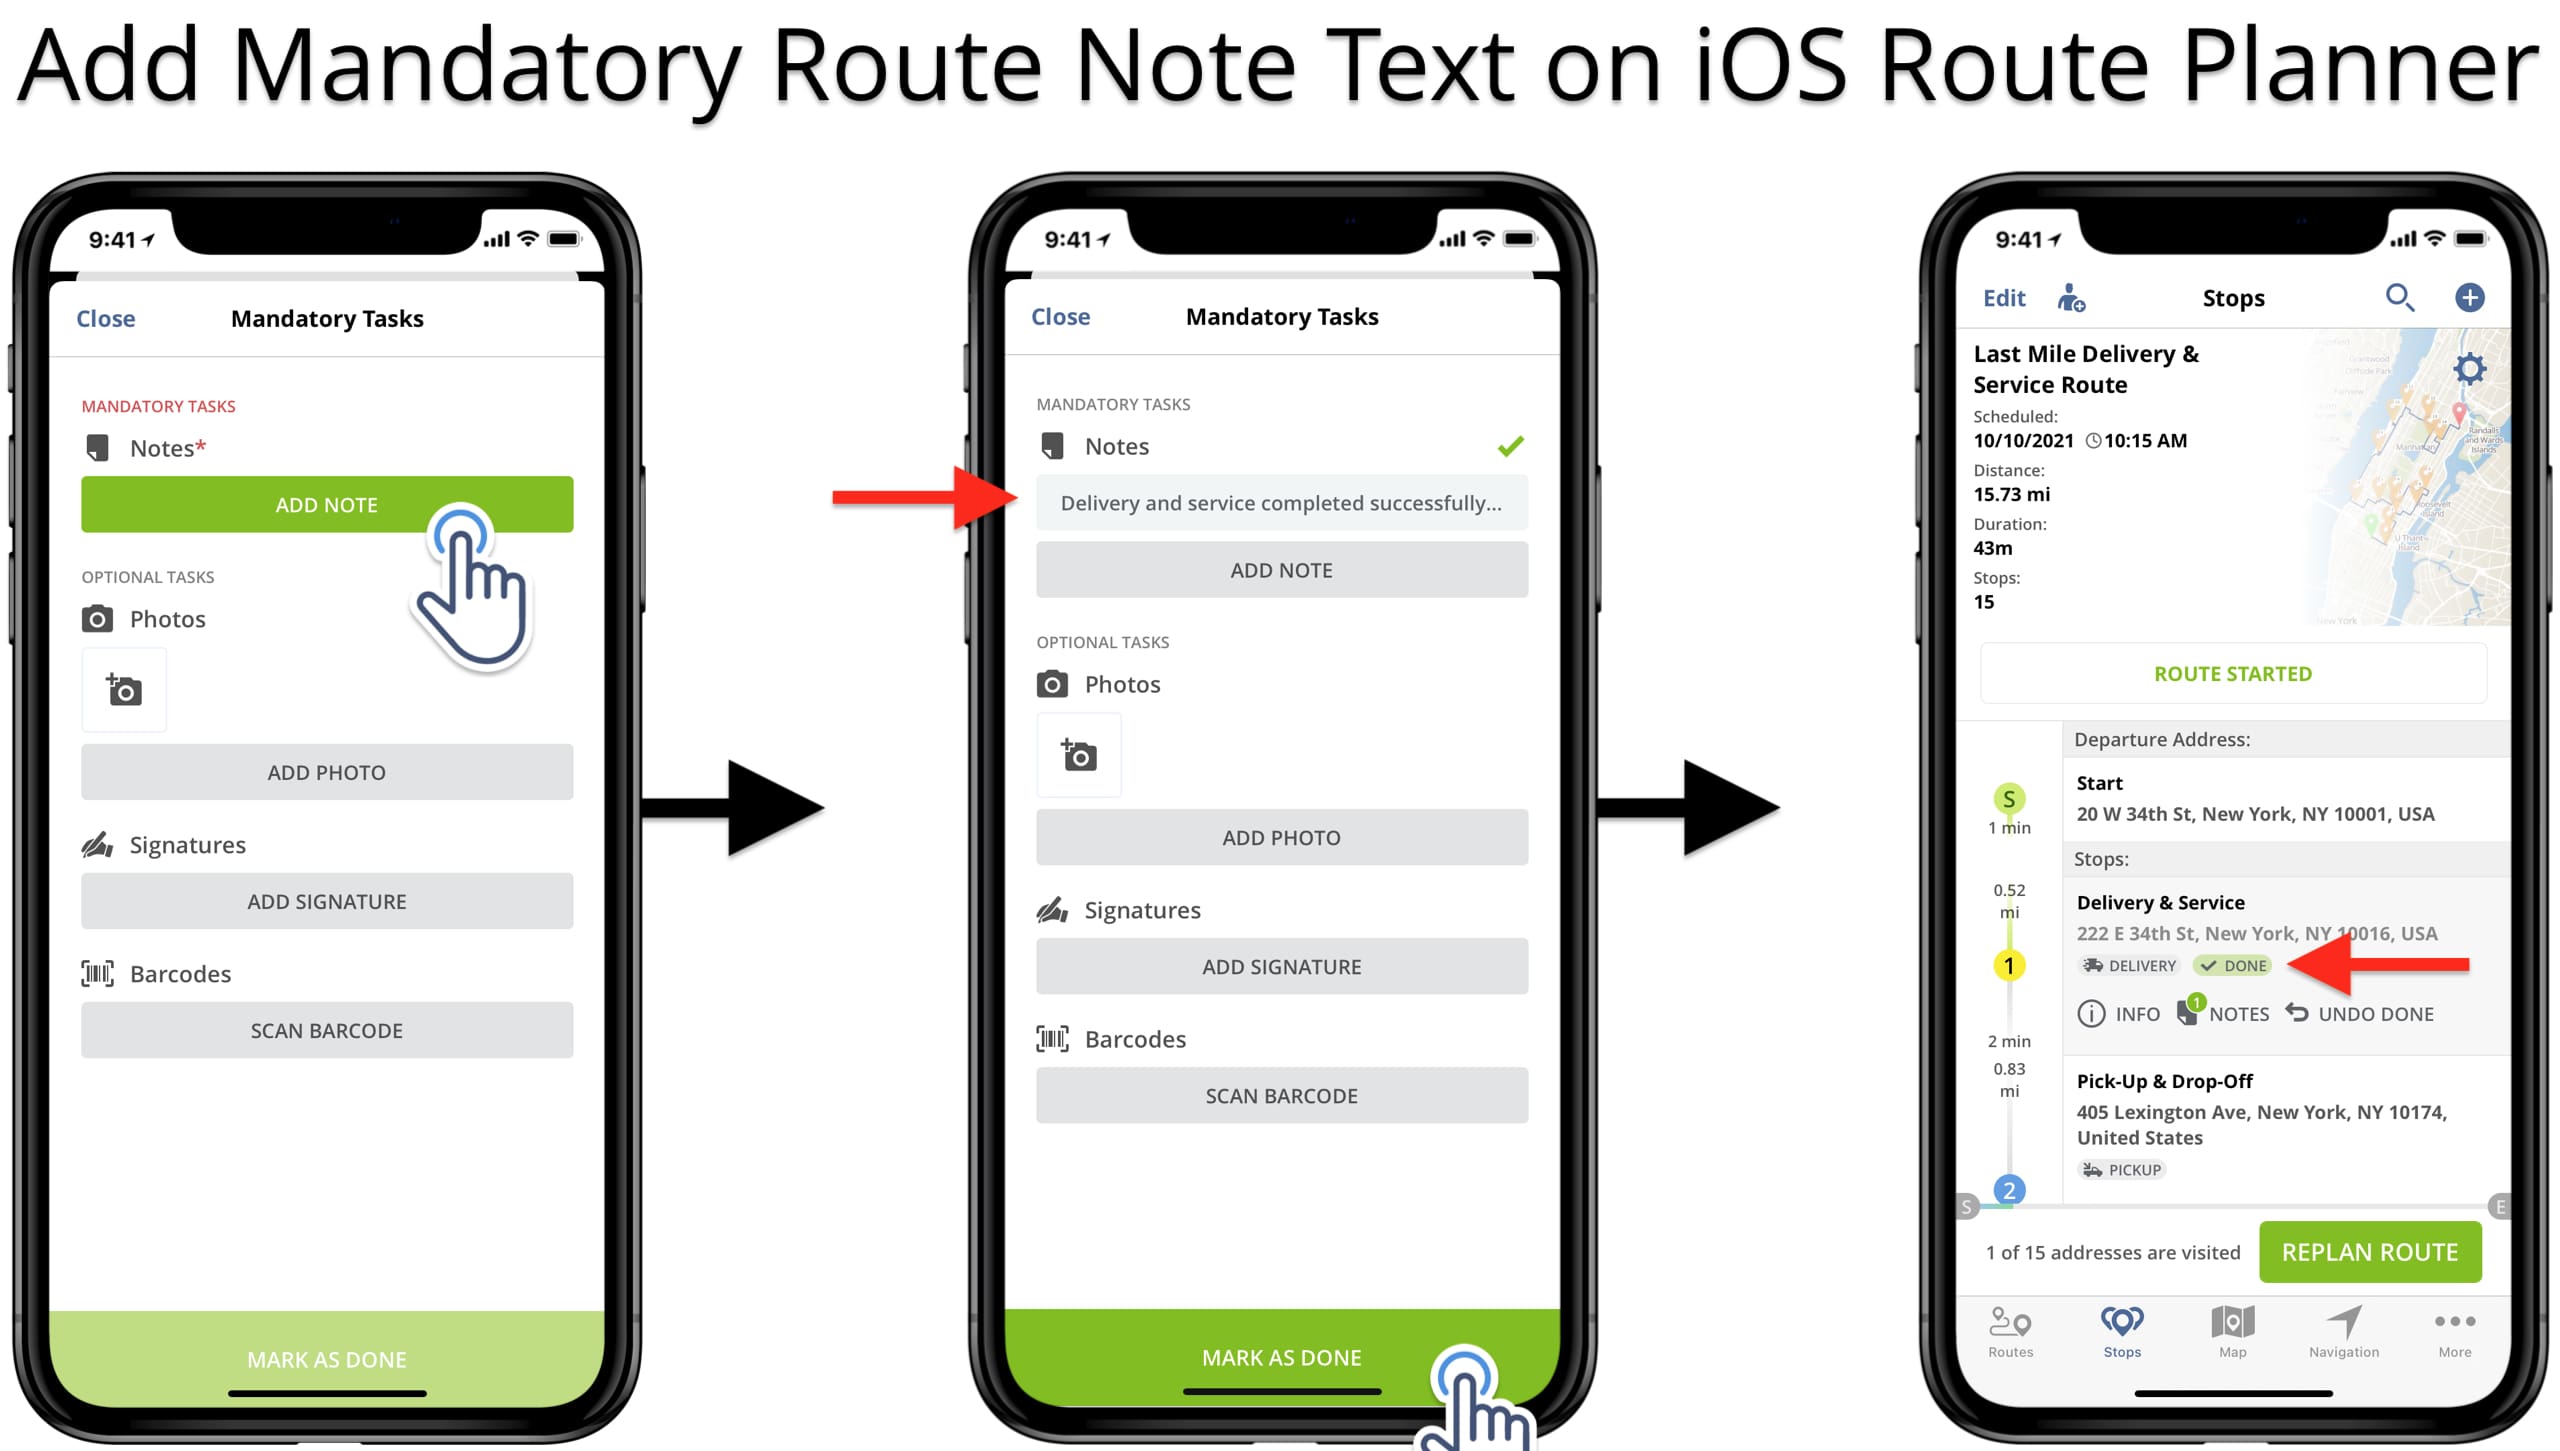 Add mandatory note text attachment to route stops as proof of delivery on iOS Route Planner.